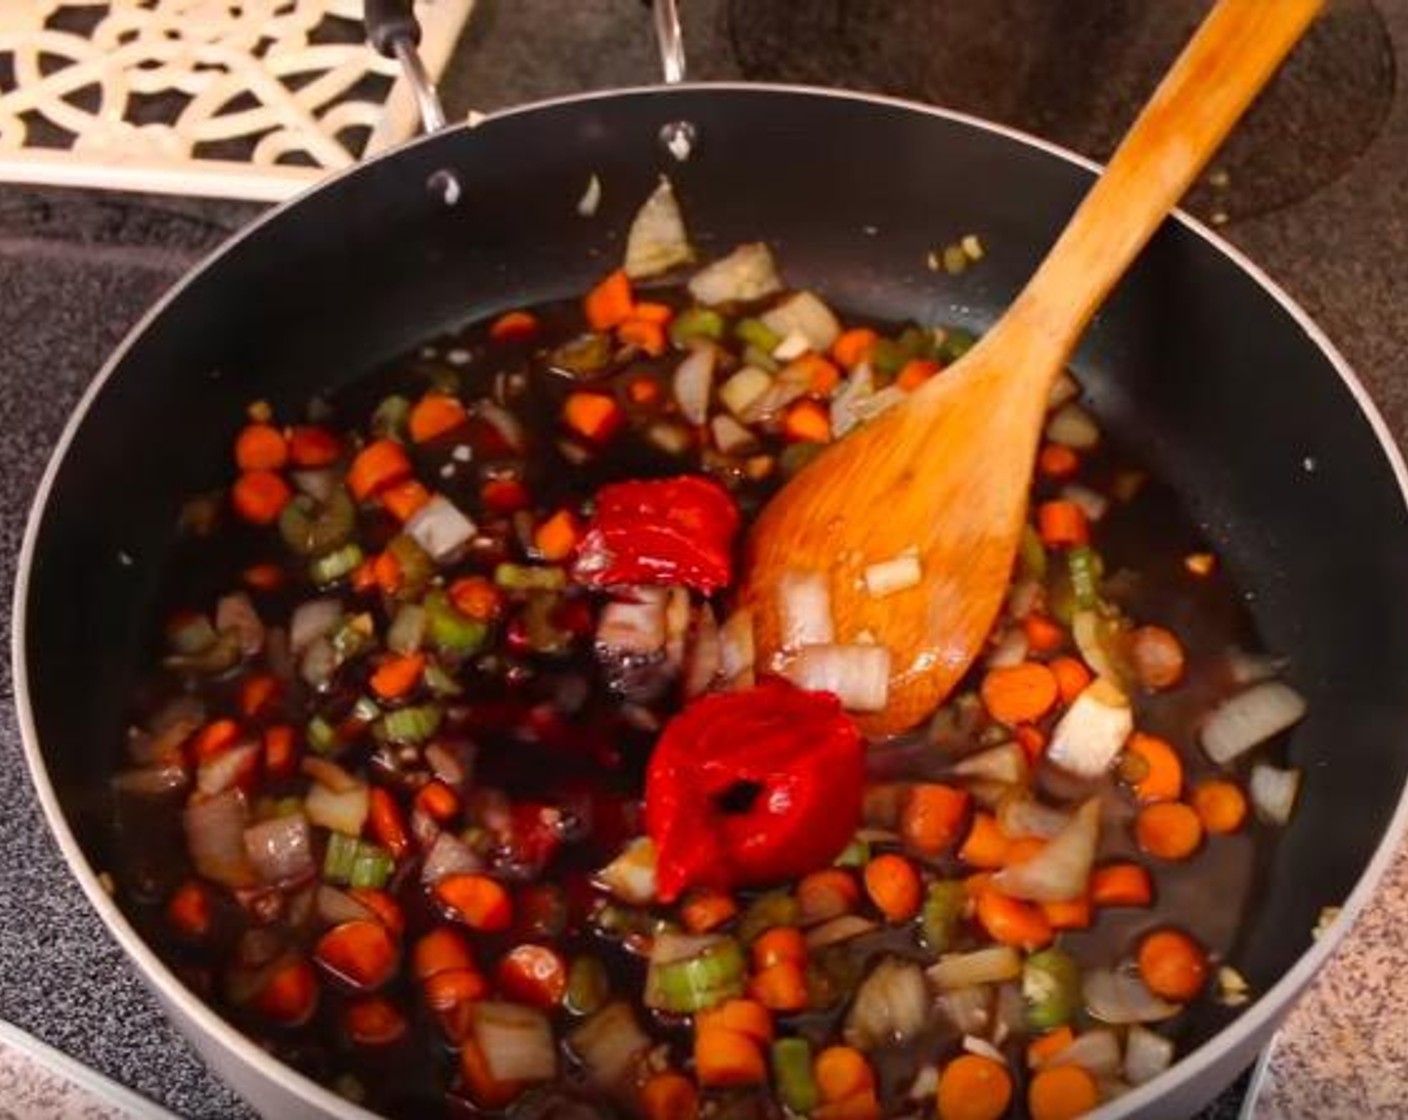 step 3 Stir in Worcestershire Sauce (1/4 cup), Balsamic Vinegar (1/4 cup), Tomato Paste (1 Tbsp), and Red Wine (1 cup). Reduce for 3 minutes.